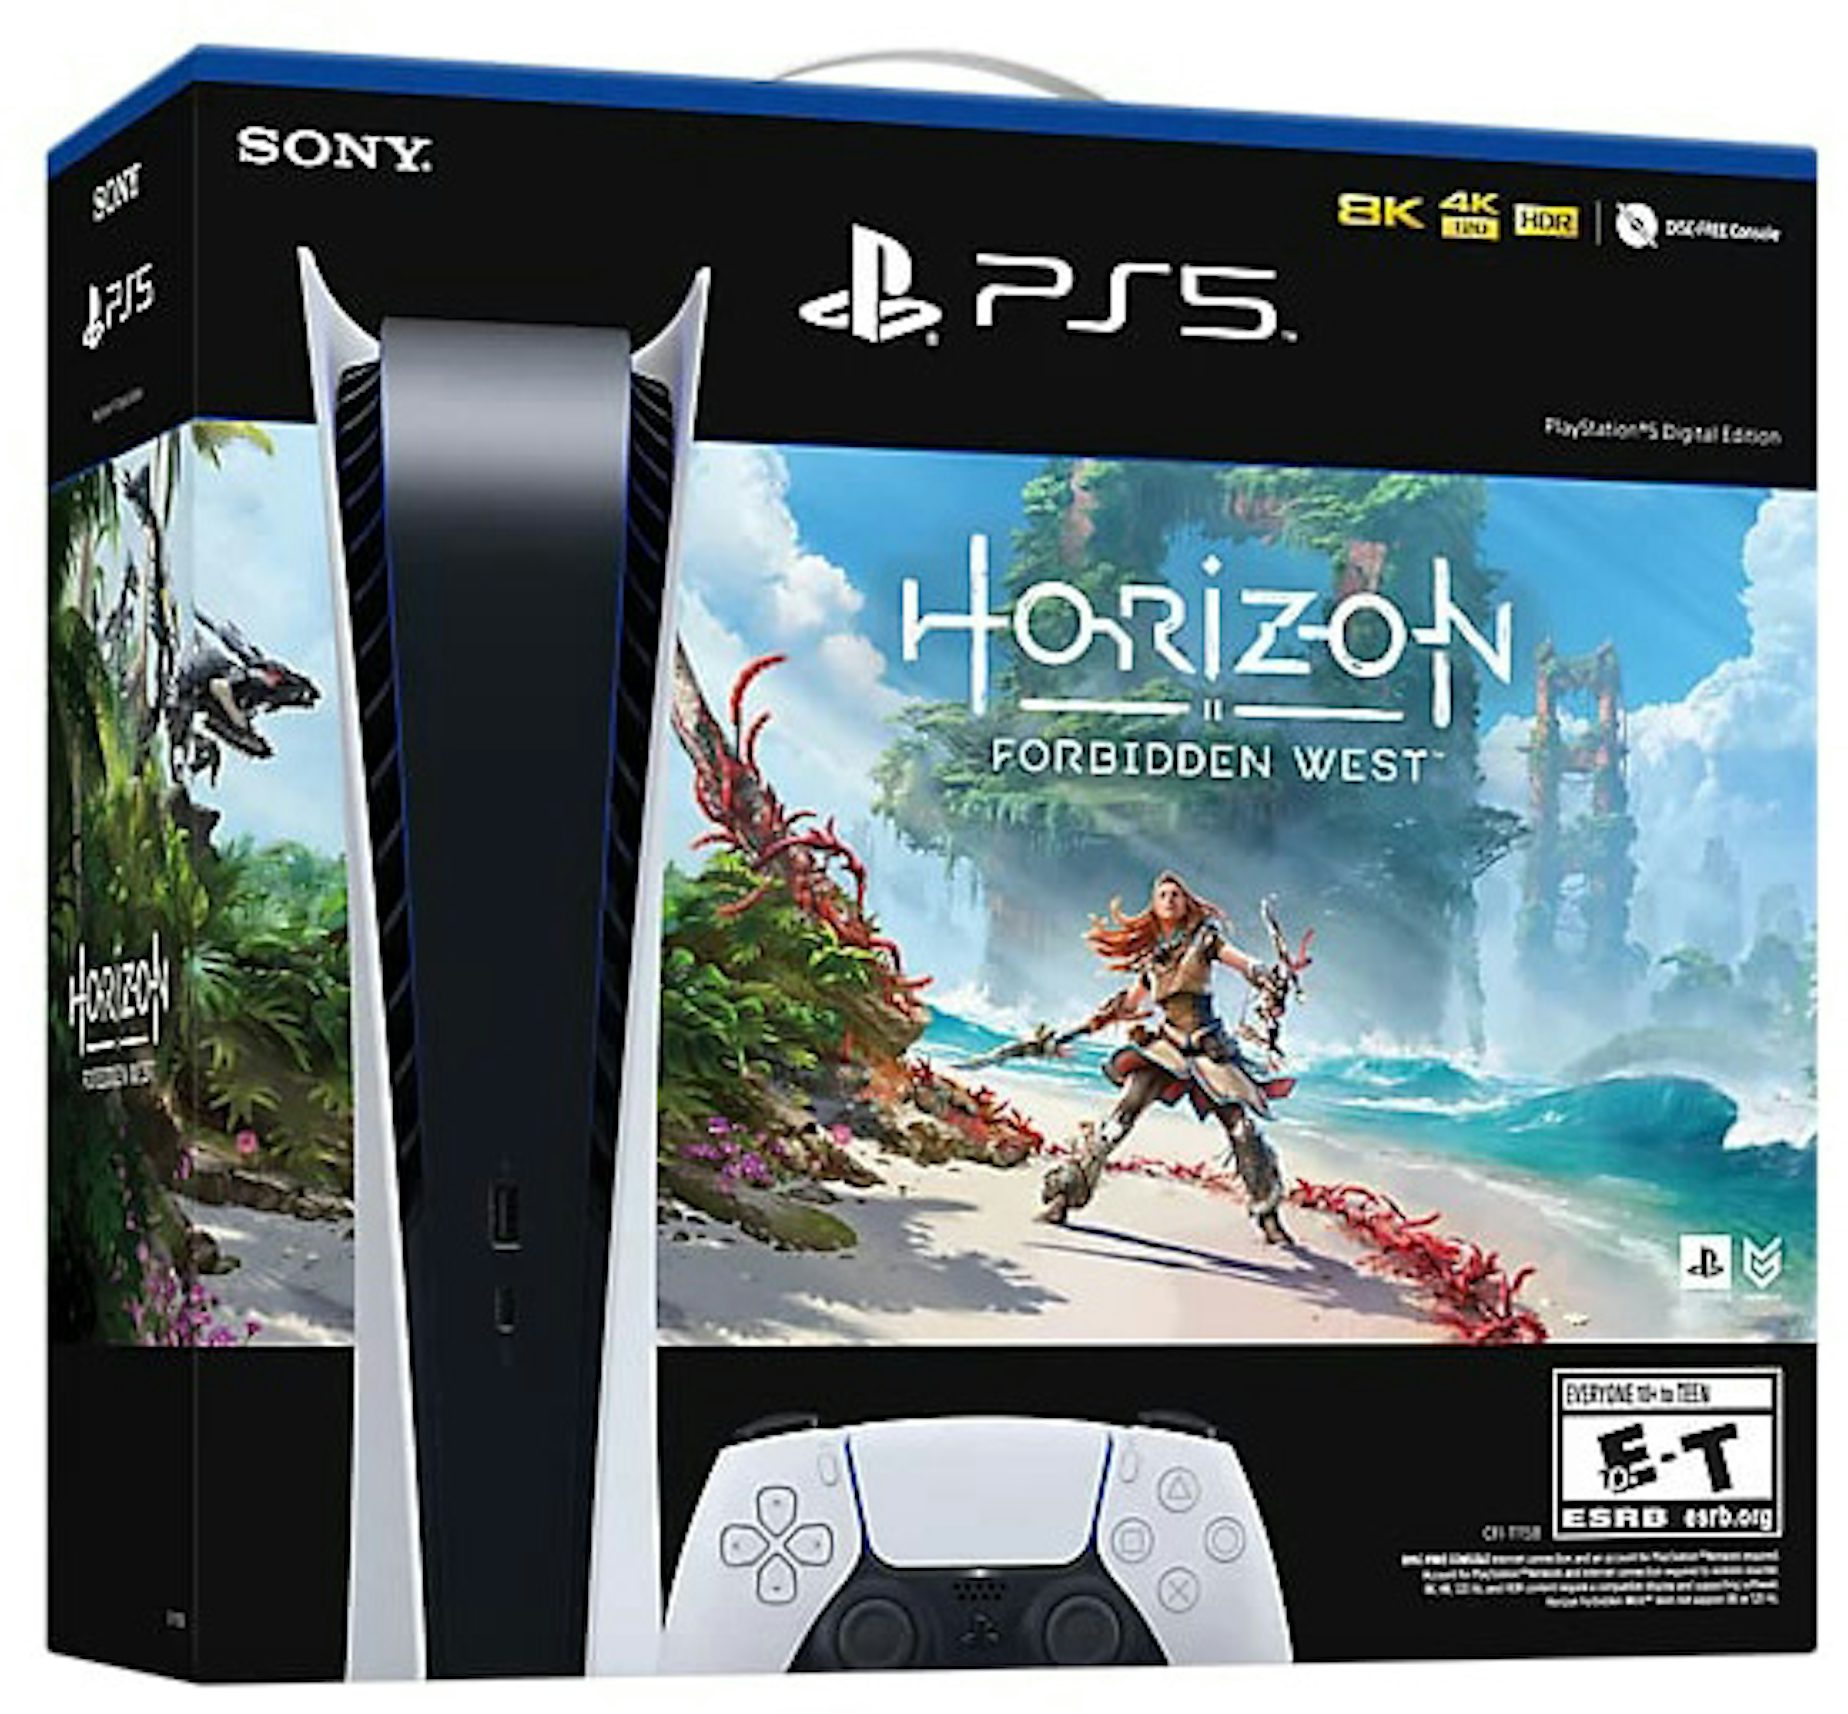 Horizon Forbidden West: Complete Edition Is Coming To PS5 And PC